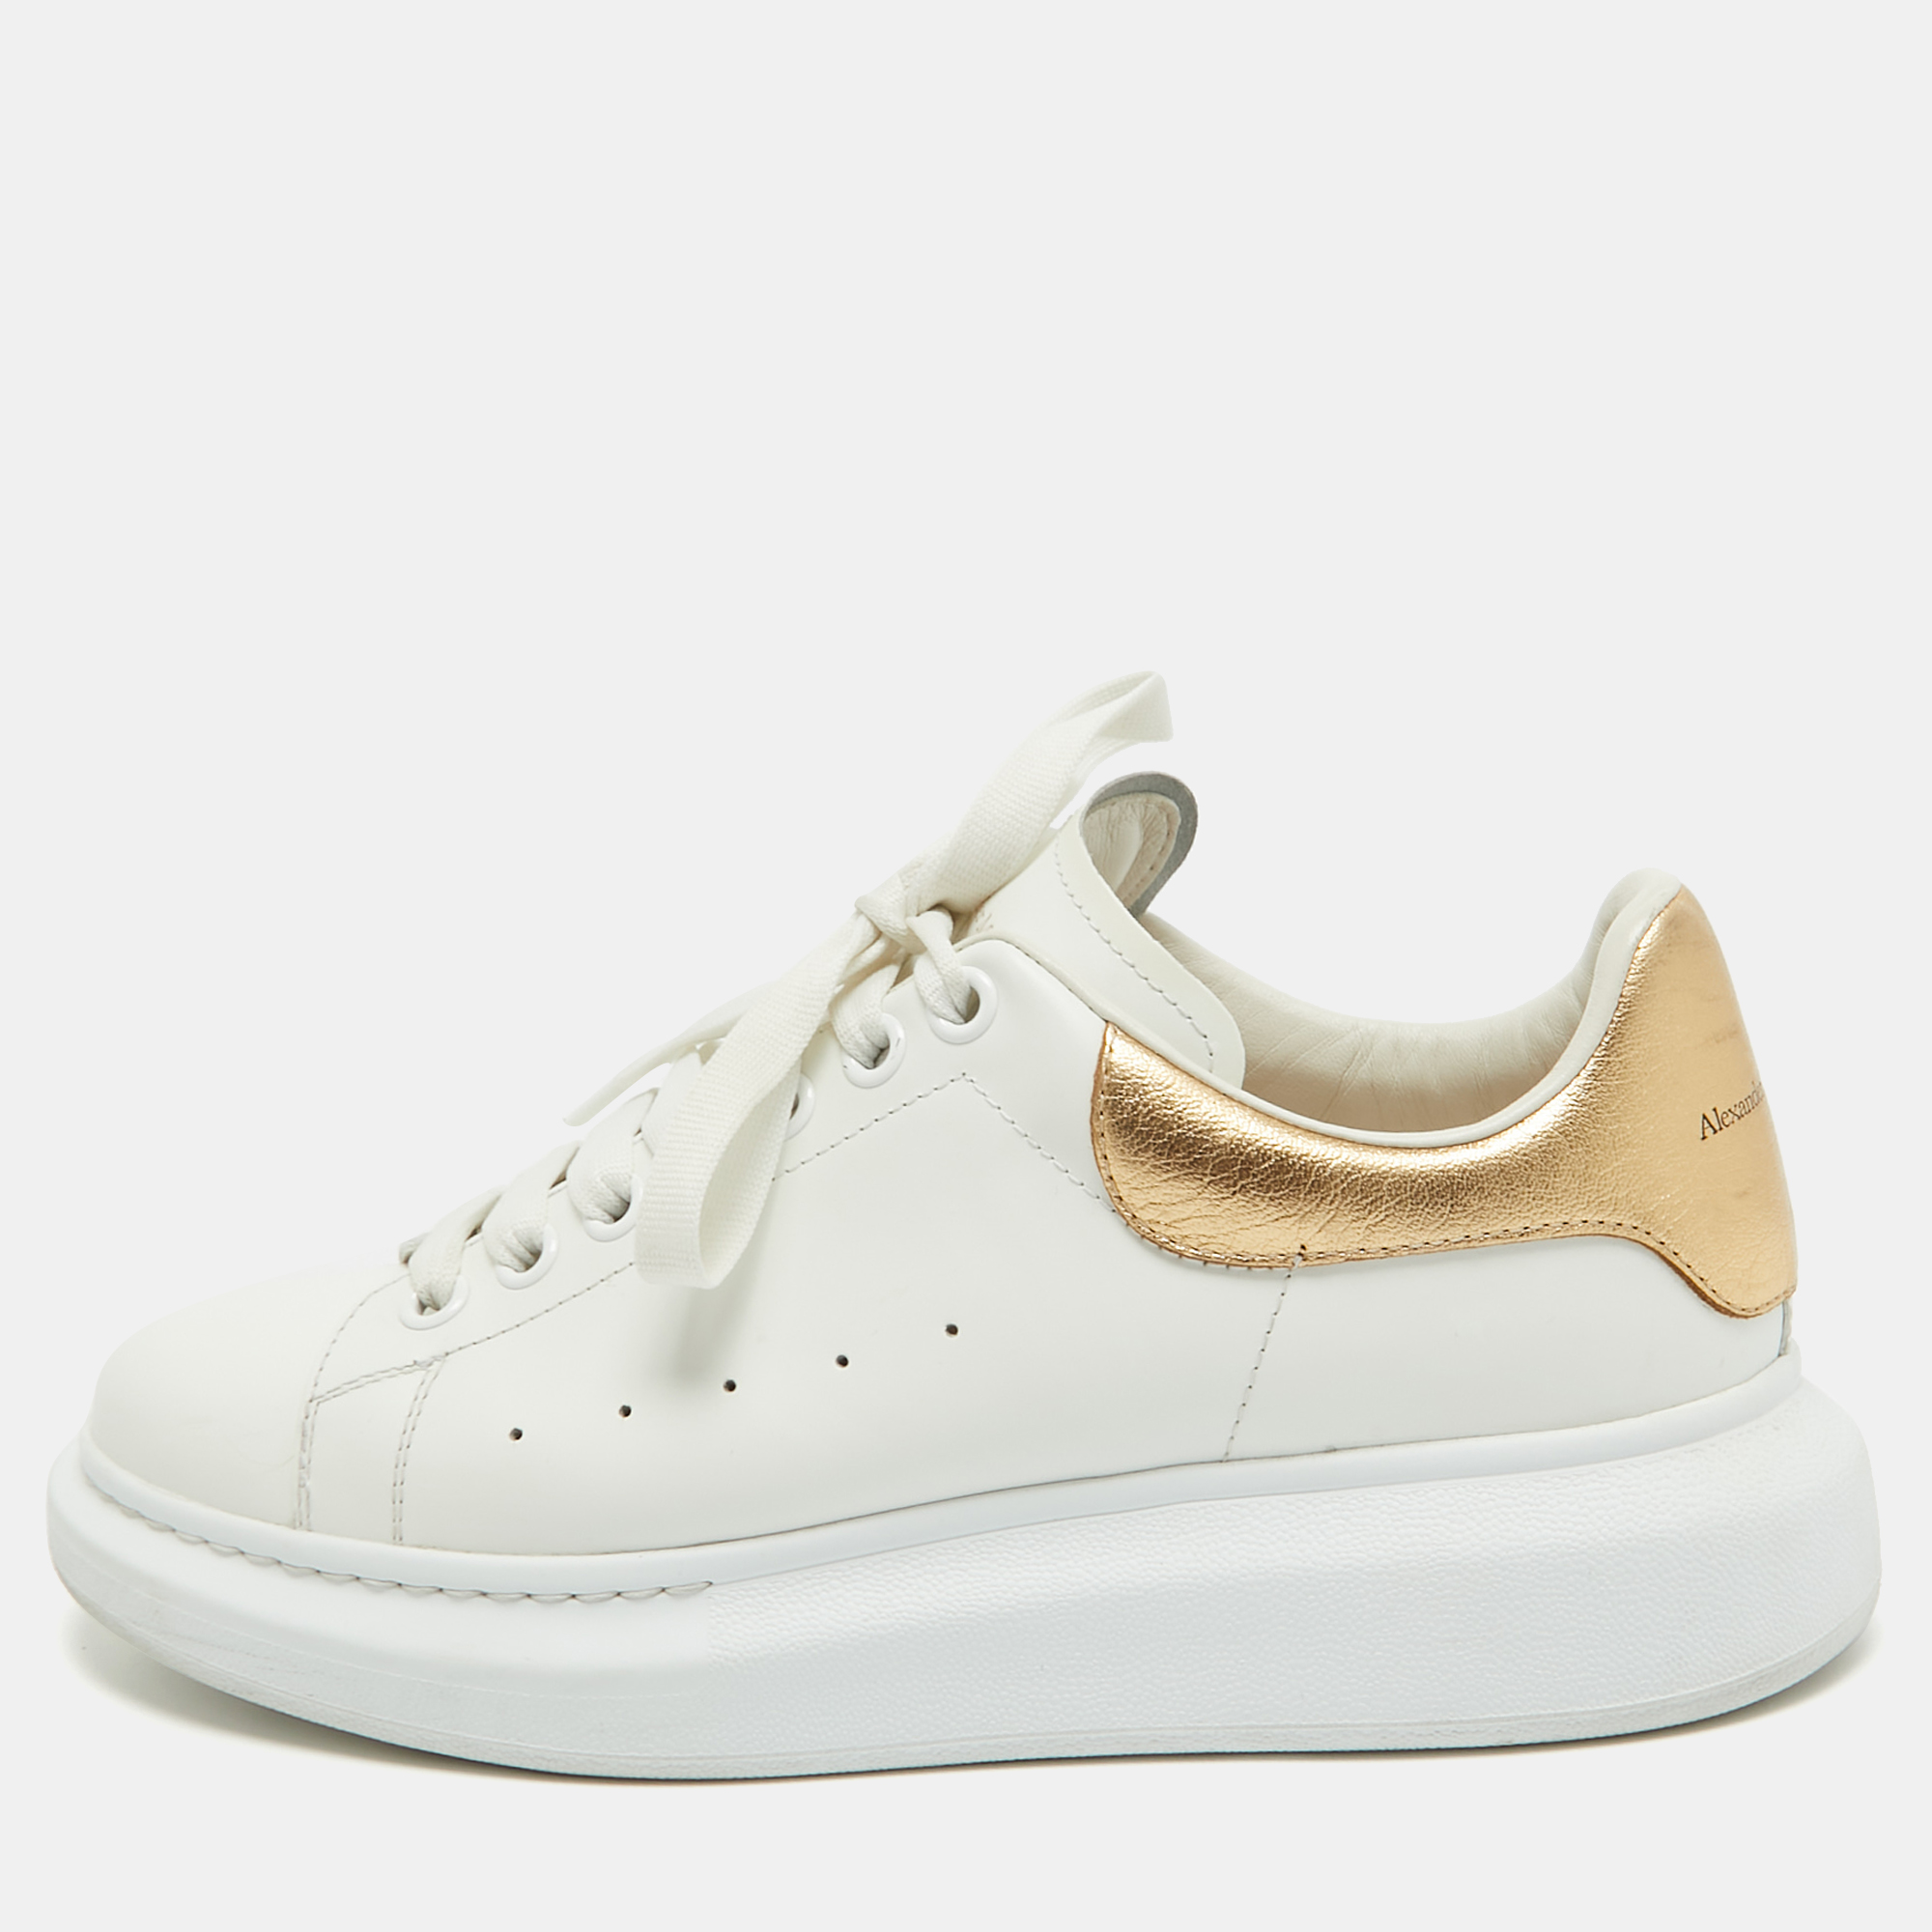 Pre-owned Alexander Mcqueen White/gold Leather Oversized Sneakers Size 40